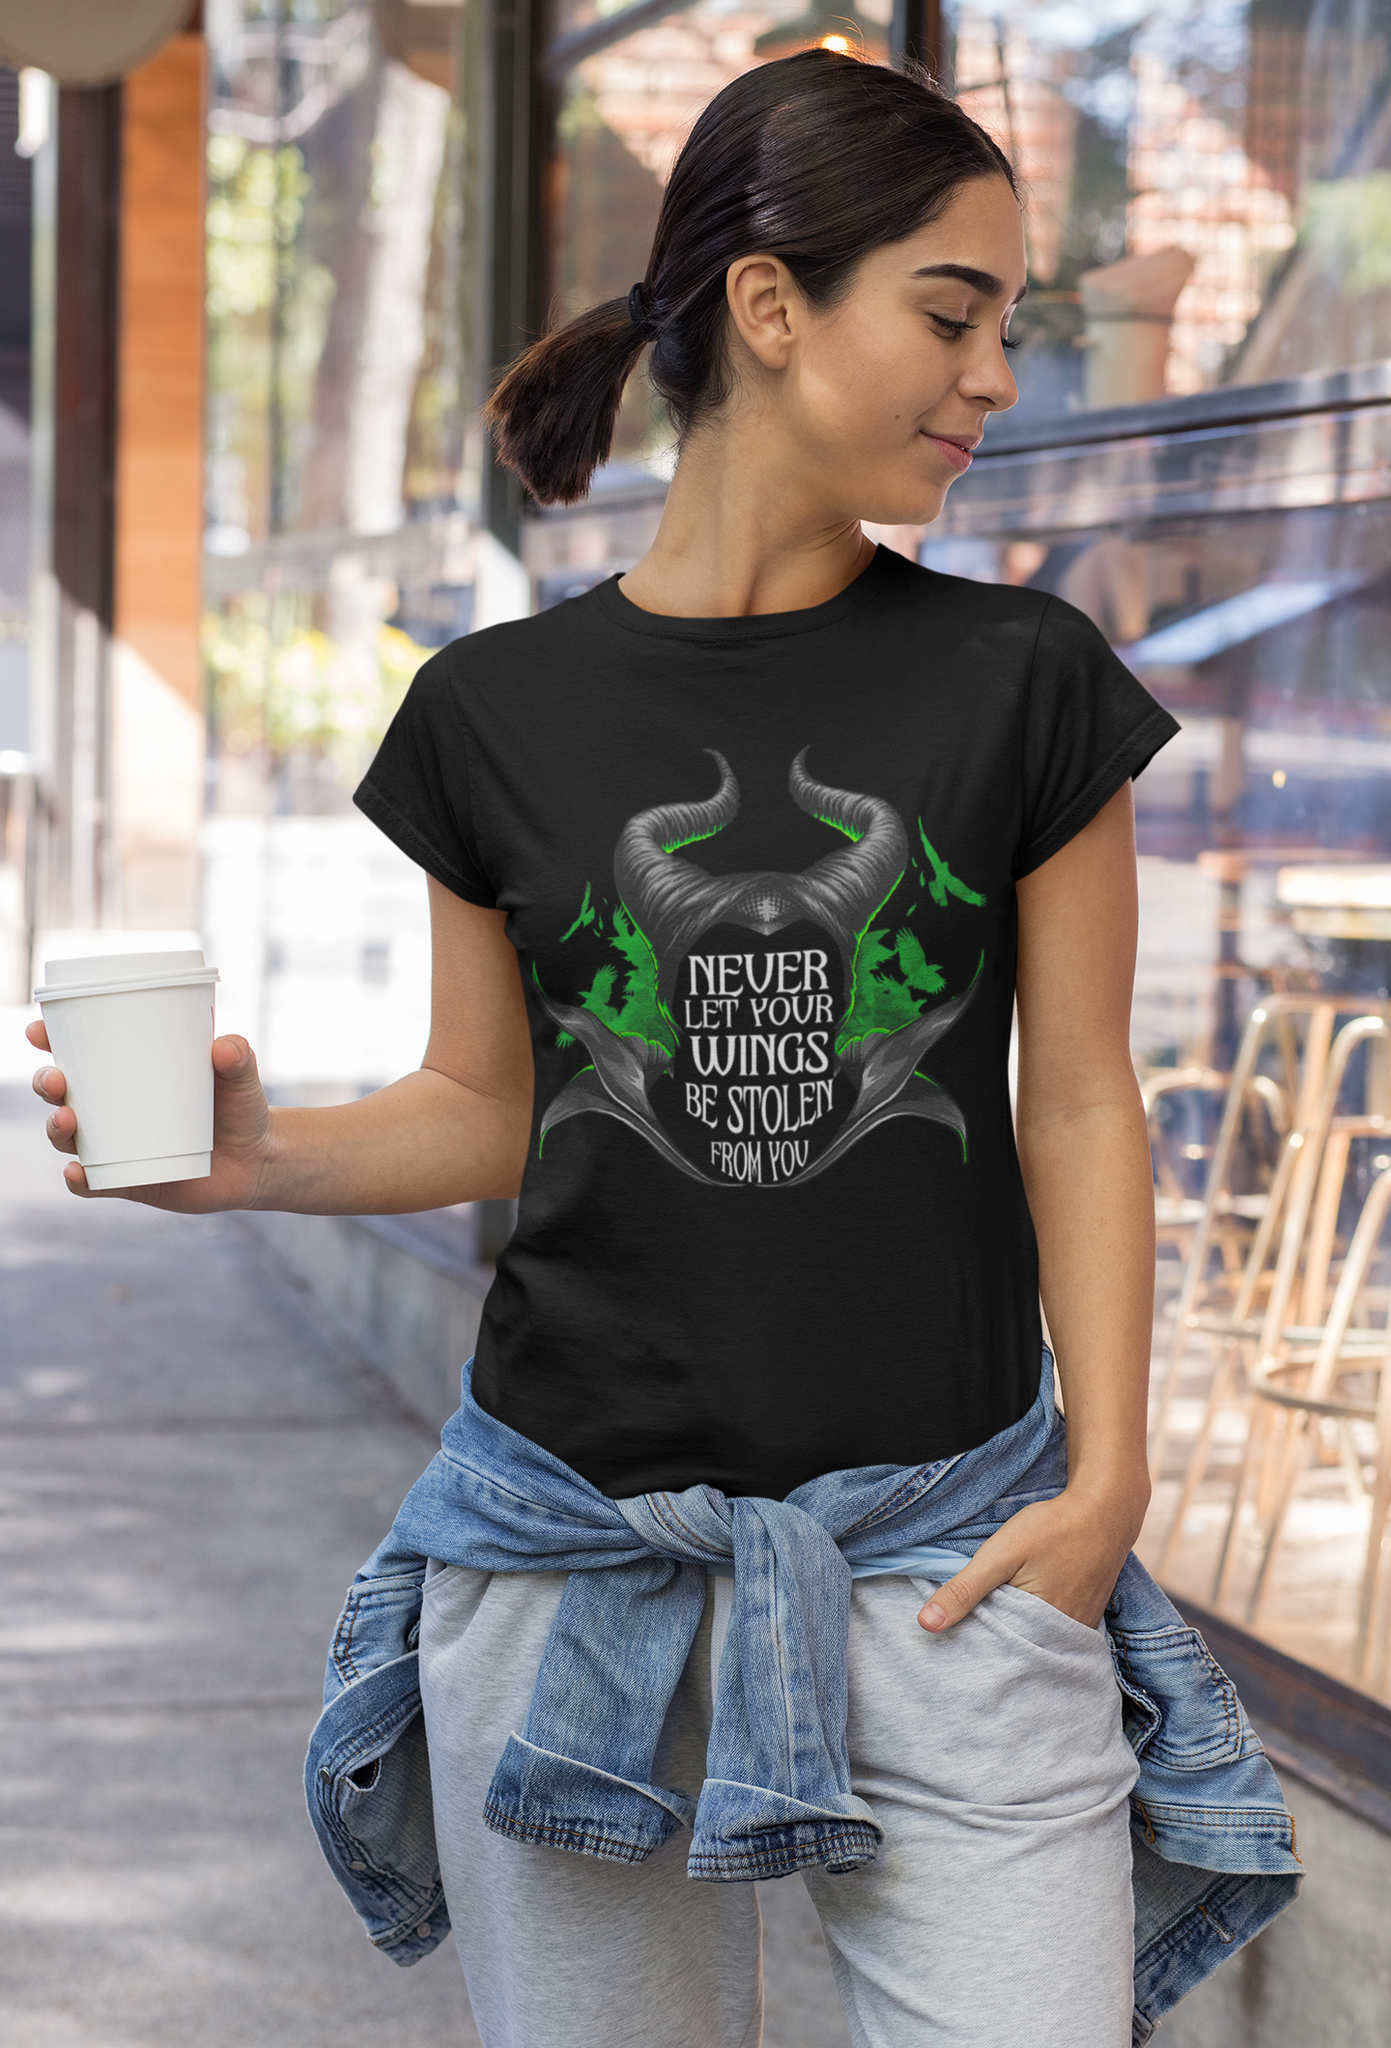 Disney Maleficent T Shirt, Never Let Your Wings Be Stolen From You Tshirt, Disney Villain Shirt